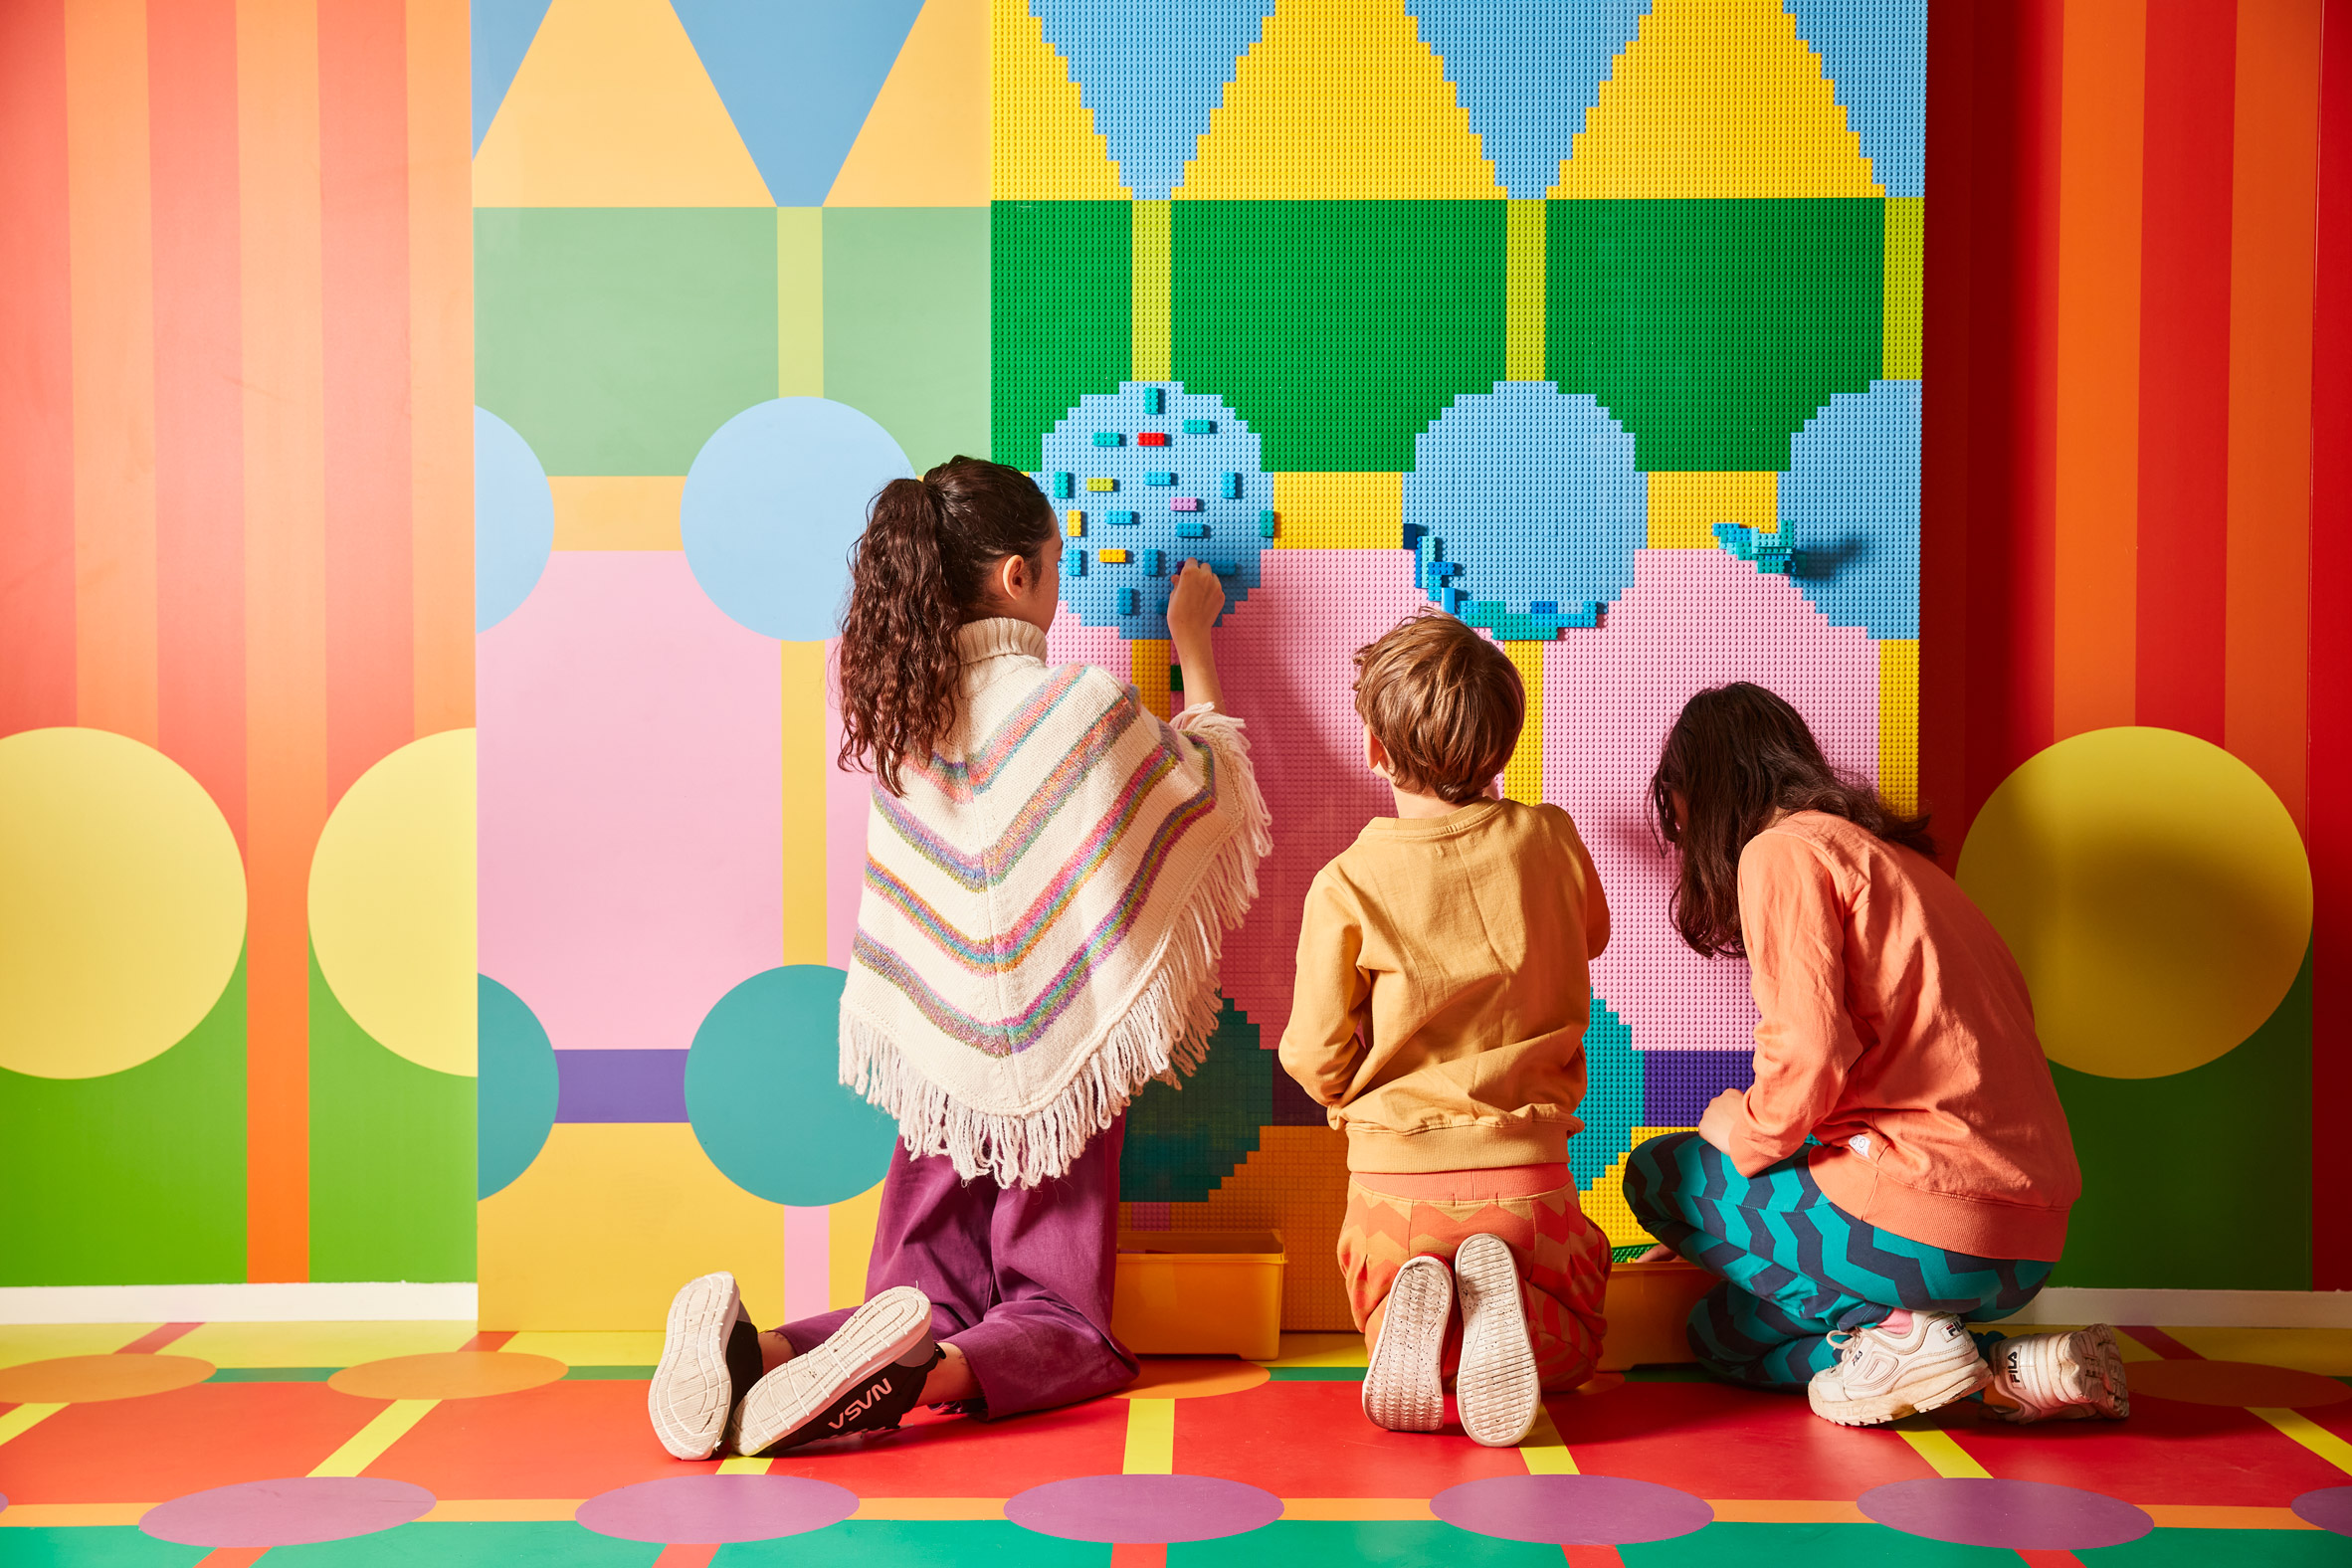 Kids add Lego bricks to a wall mural in the Laundrette of Dreams